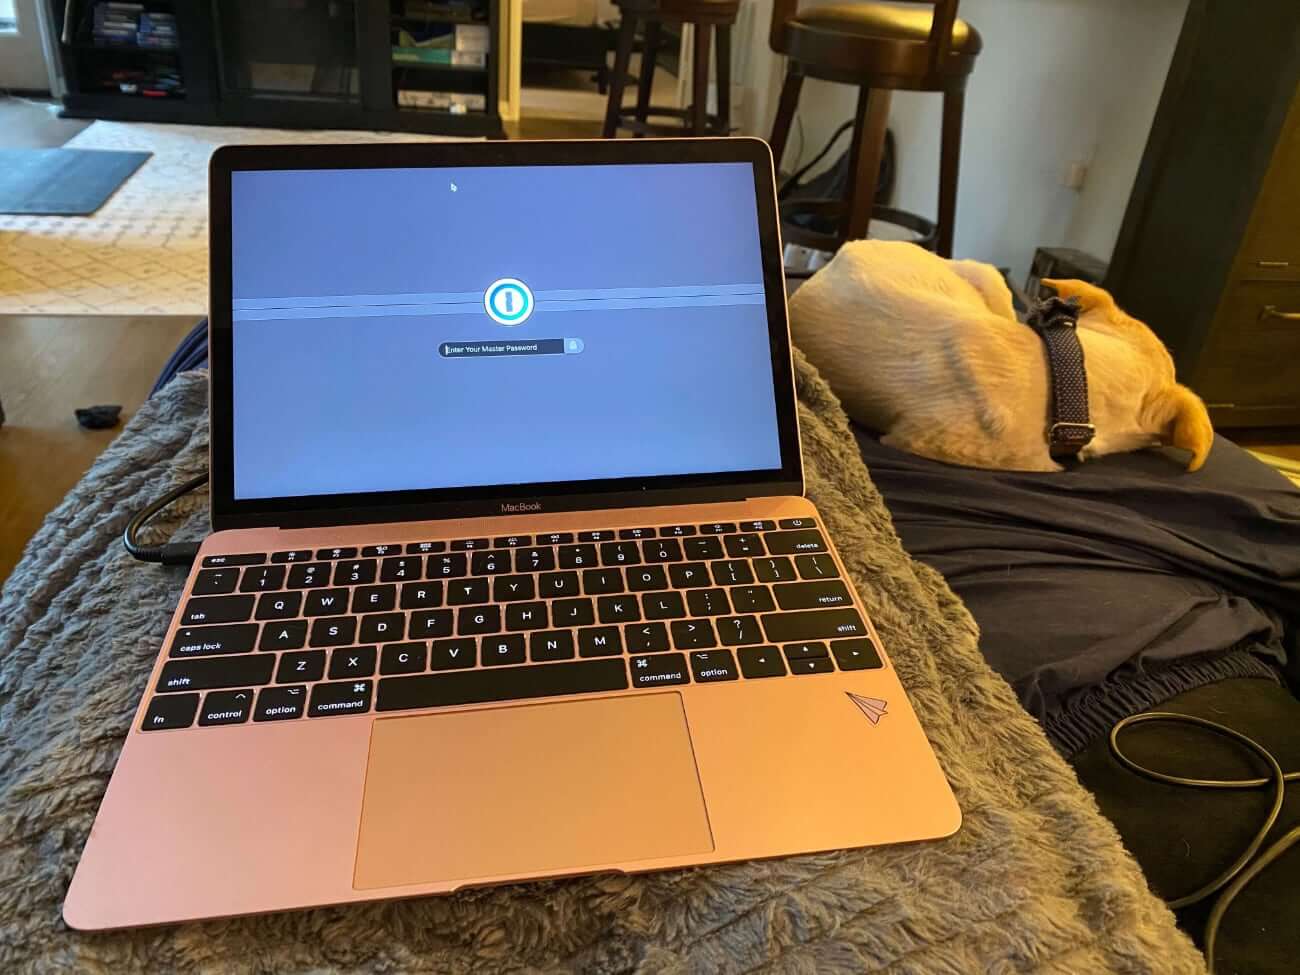 Image of Jackie's laptop on her lap with dog on the sofa